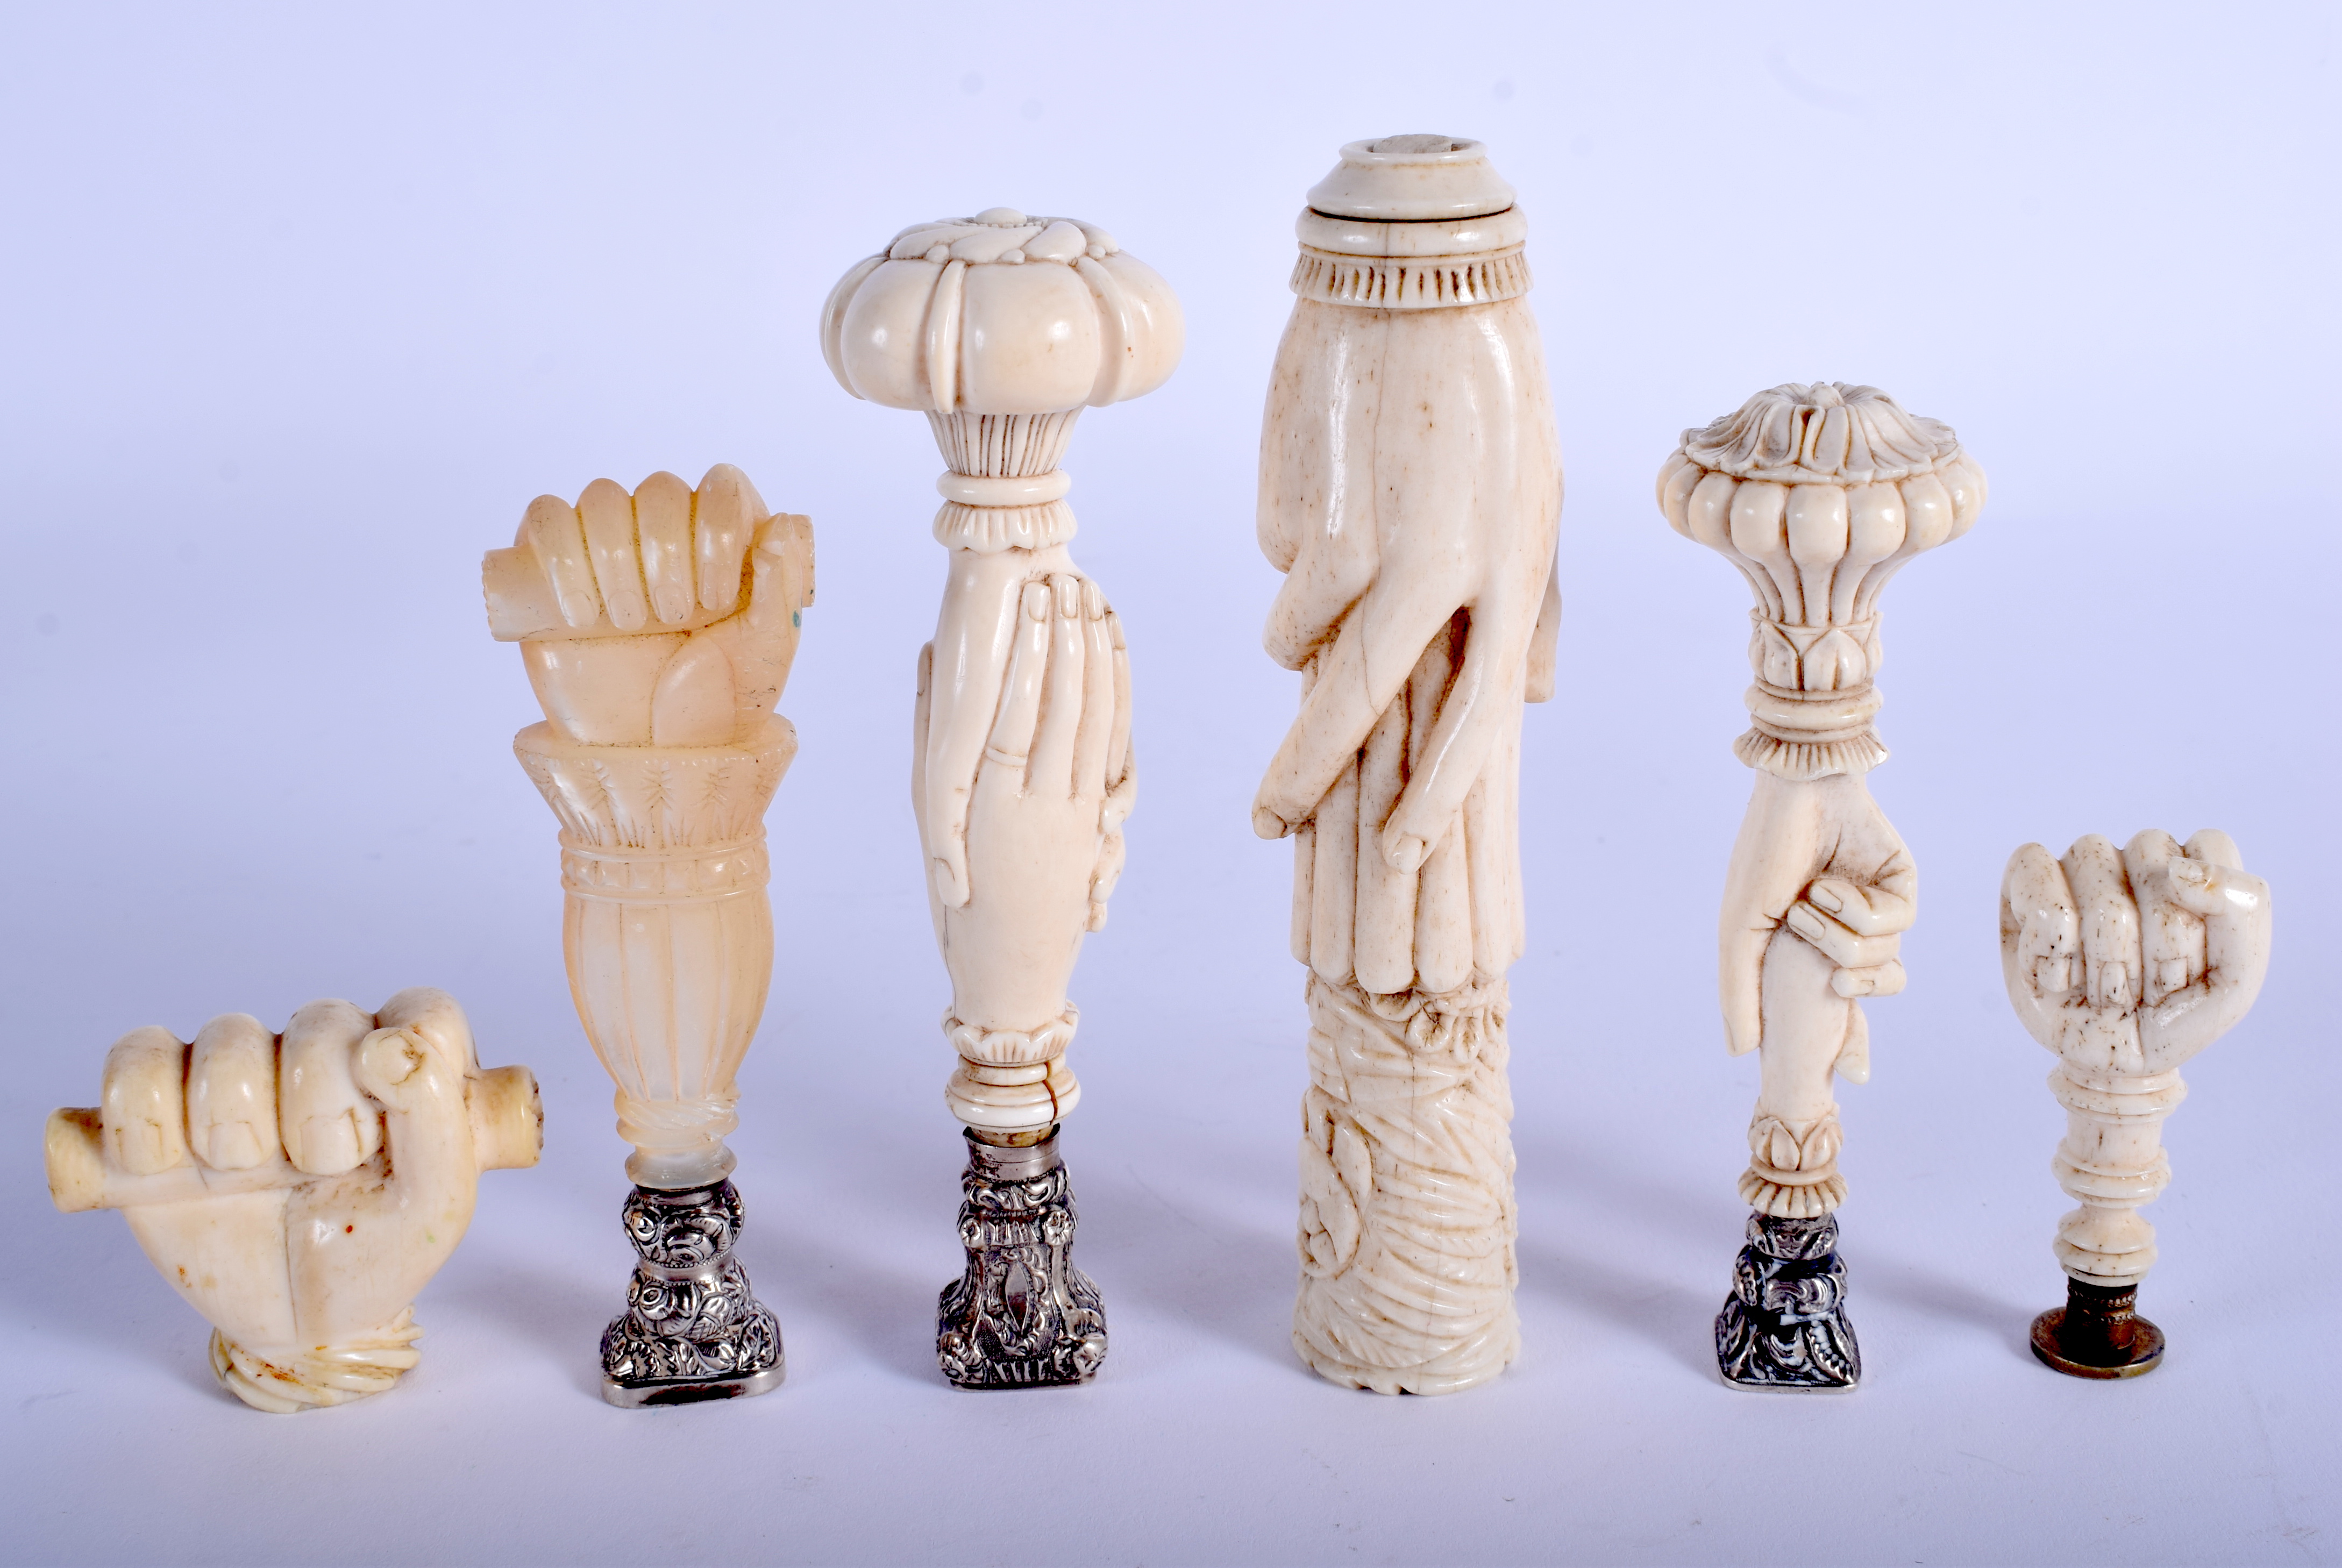 SIX 18TH/19TH CENTURY CARVED IVORY AND MOTHER OF PEARL SEALS in various forms. Largest 10.5 cm high.